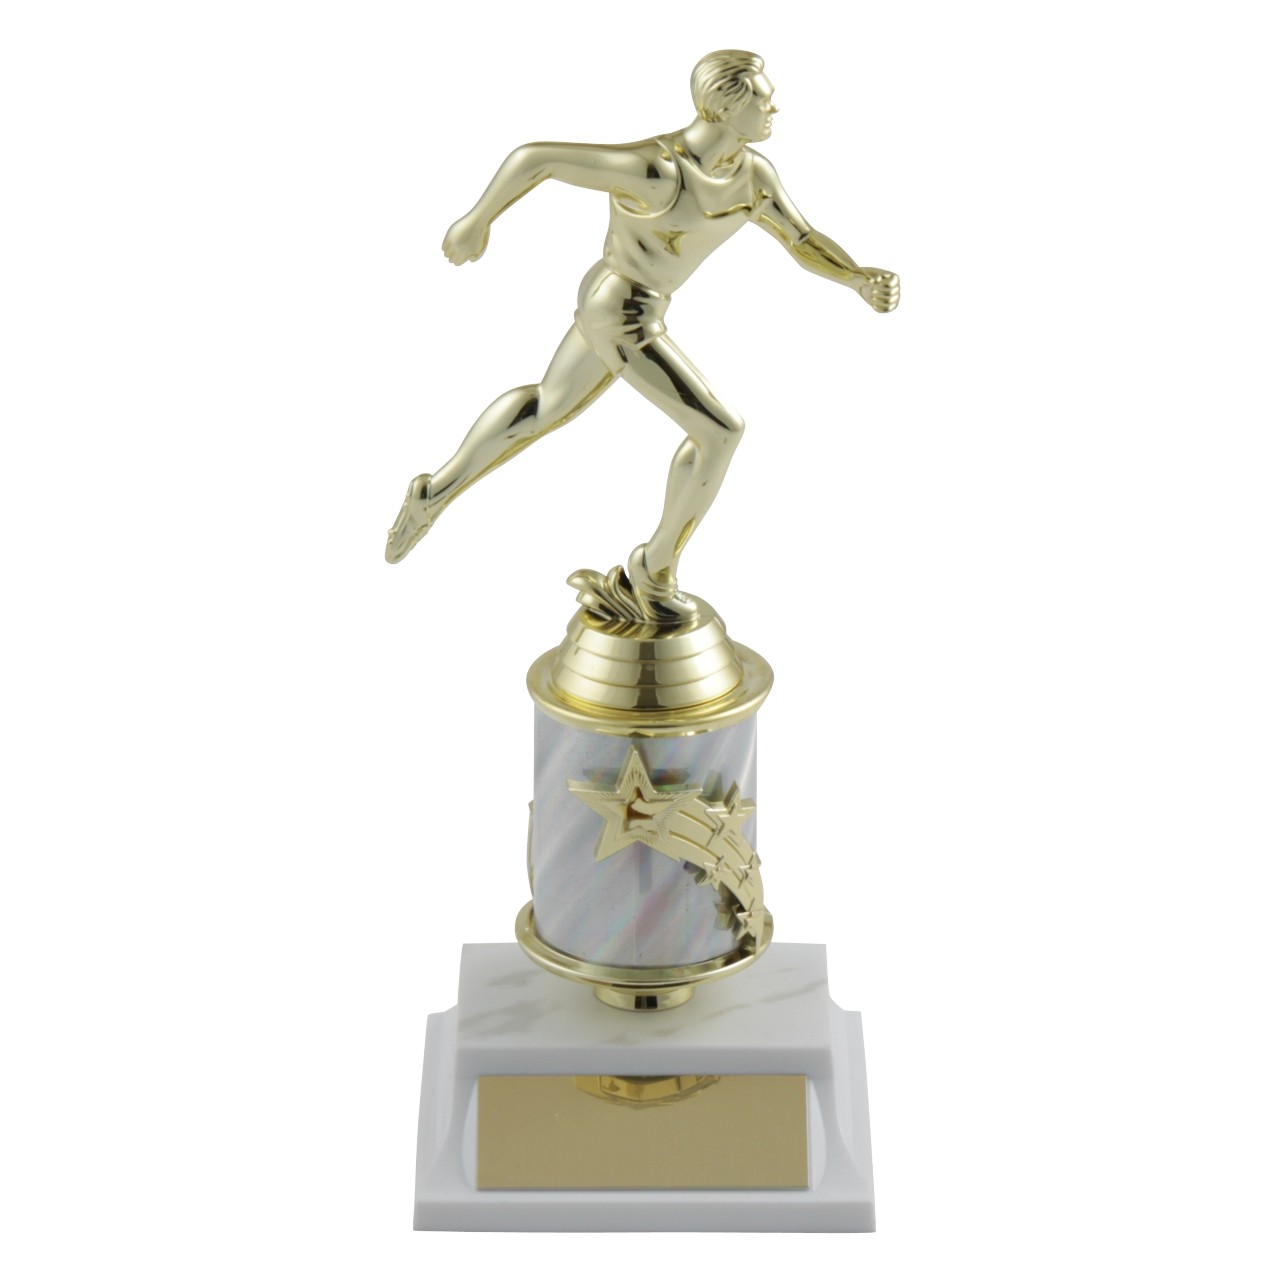 ATHLETICS RUNNING TROPHY ENGRAVED FREE TIMING PODIUM FIELD MINI STAR TROPHIES 